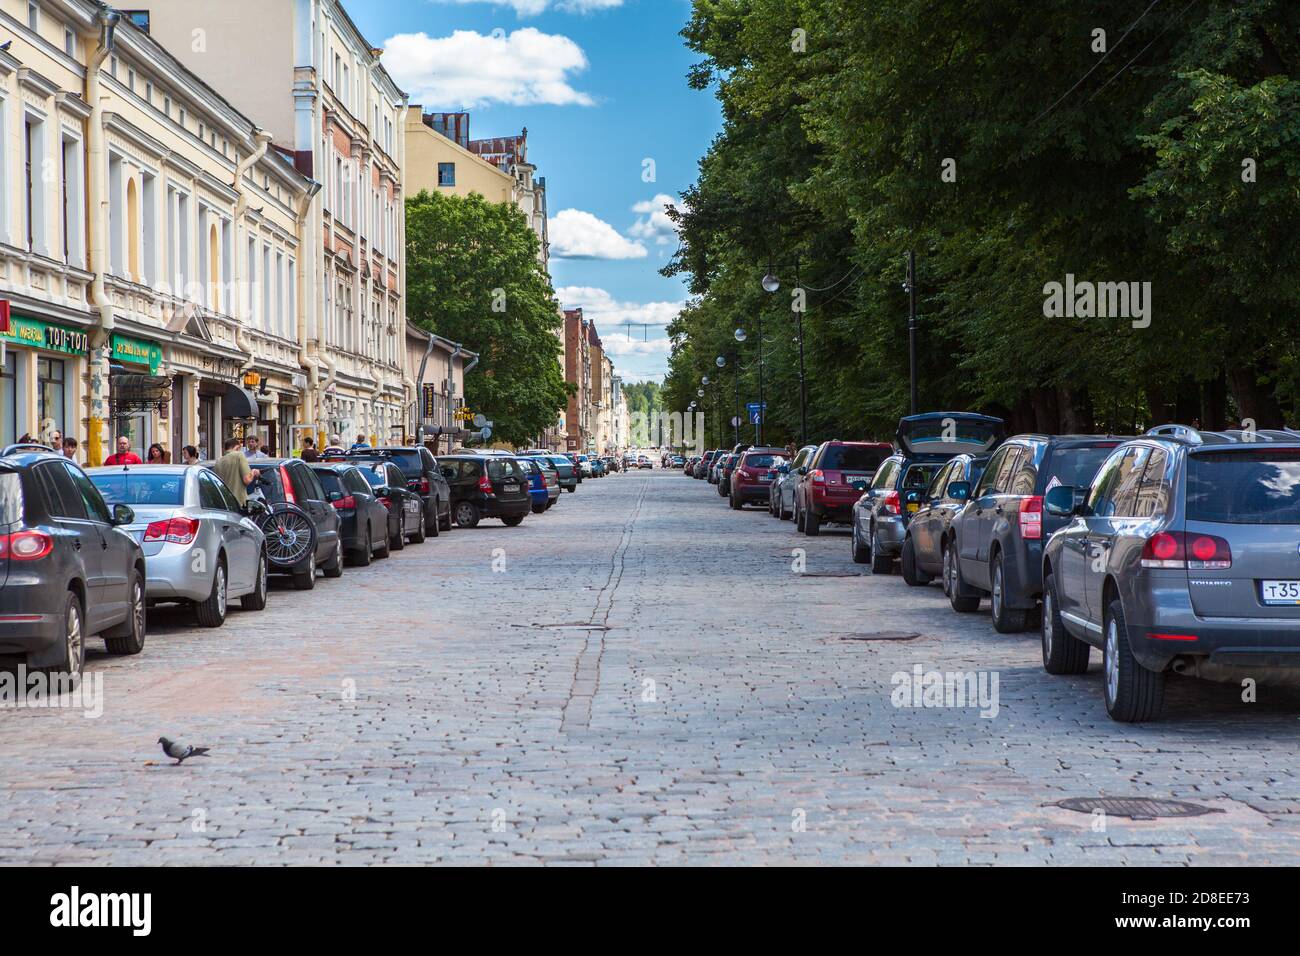 Vyborg, Russia-circa Jul, 2012: The Lenin avenue with cobblestone road and park area. The Vyborg is a town in western Russia, close to the Finnish bor Stock Photo